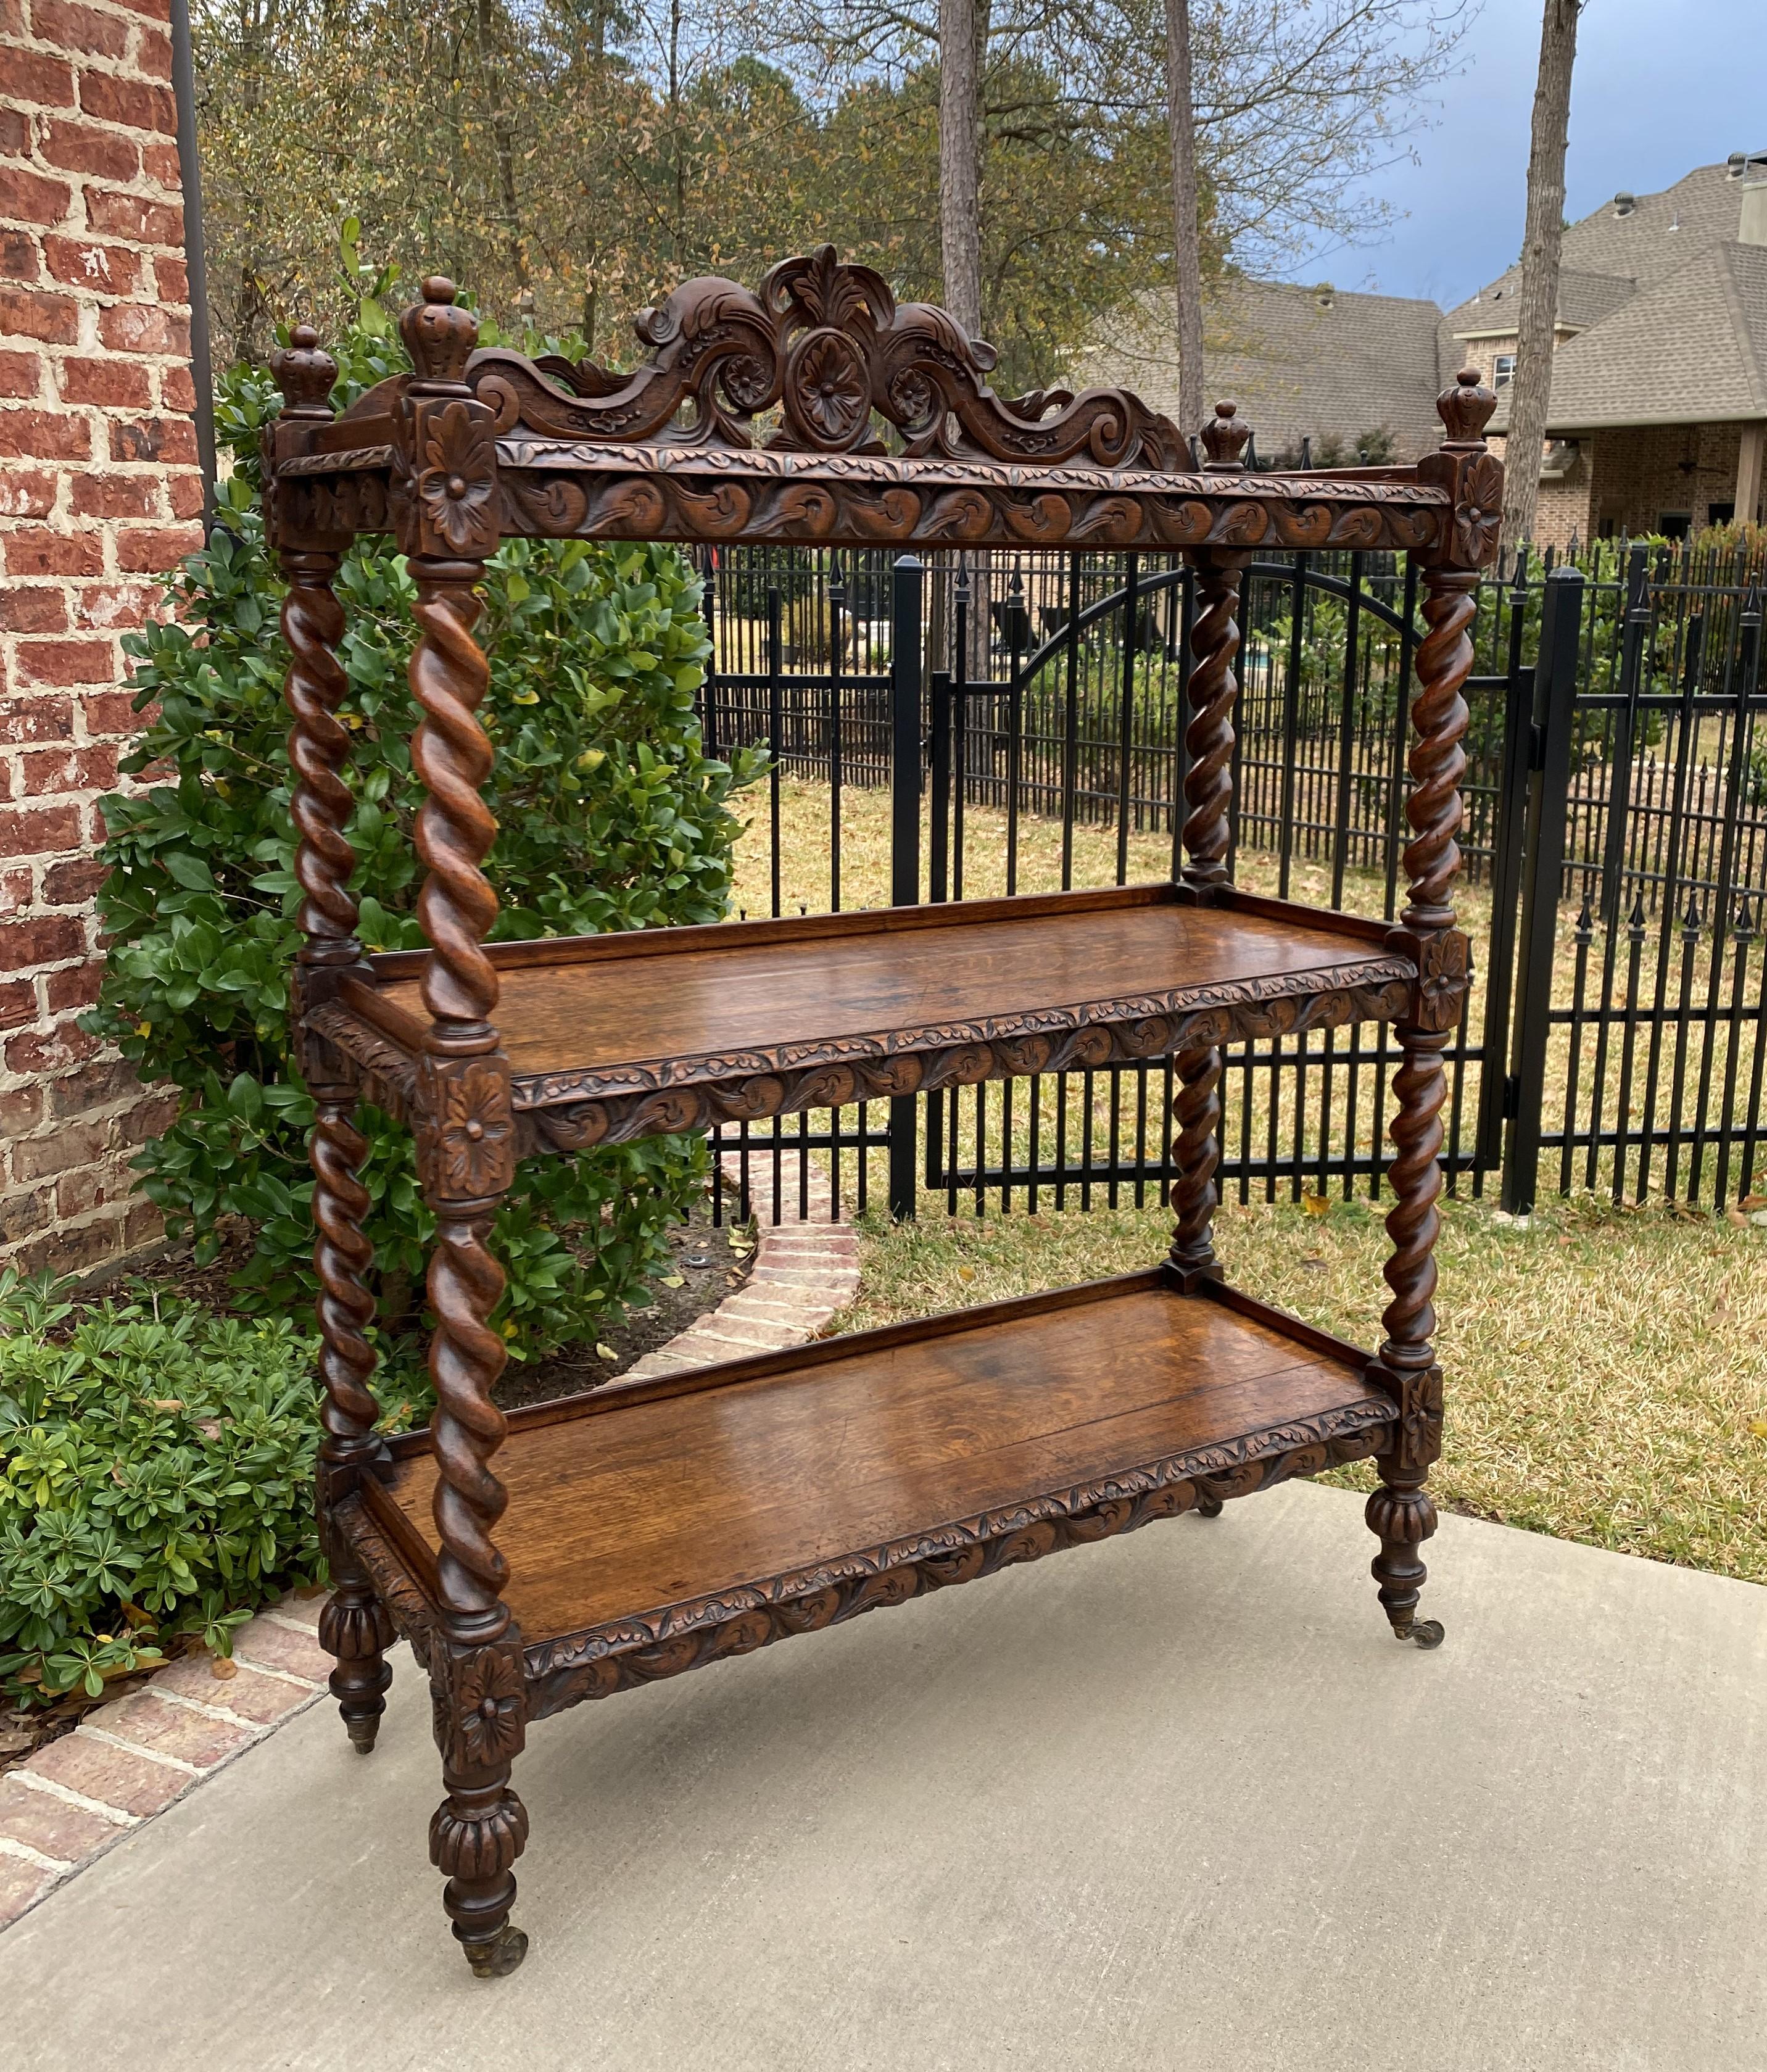 Superb and unique antique English oak etagere, server, display shelf or bookcase~~barley twist posts and casters~~~c. 1880s

This is only one of multiple exquisite pieces recently received from our English shipper~~19th century and in unbelievably